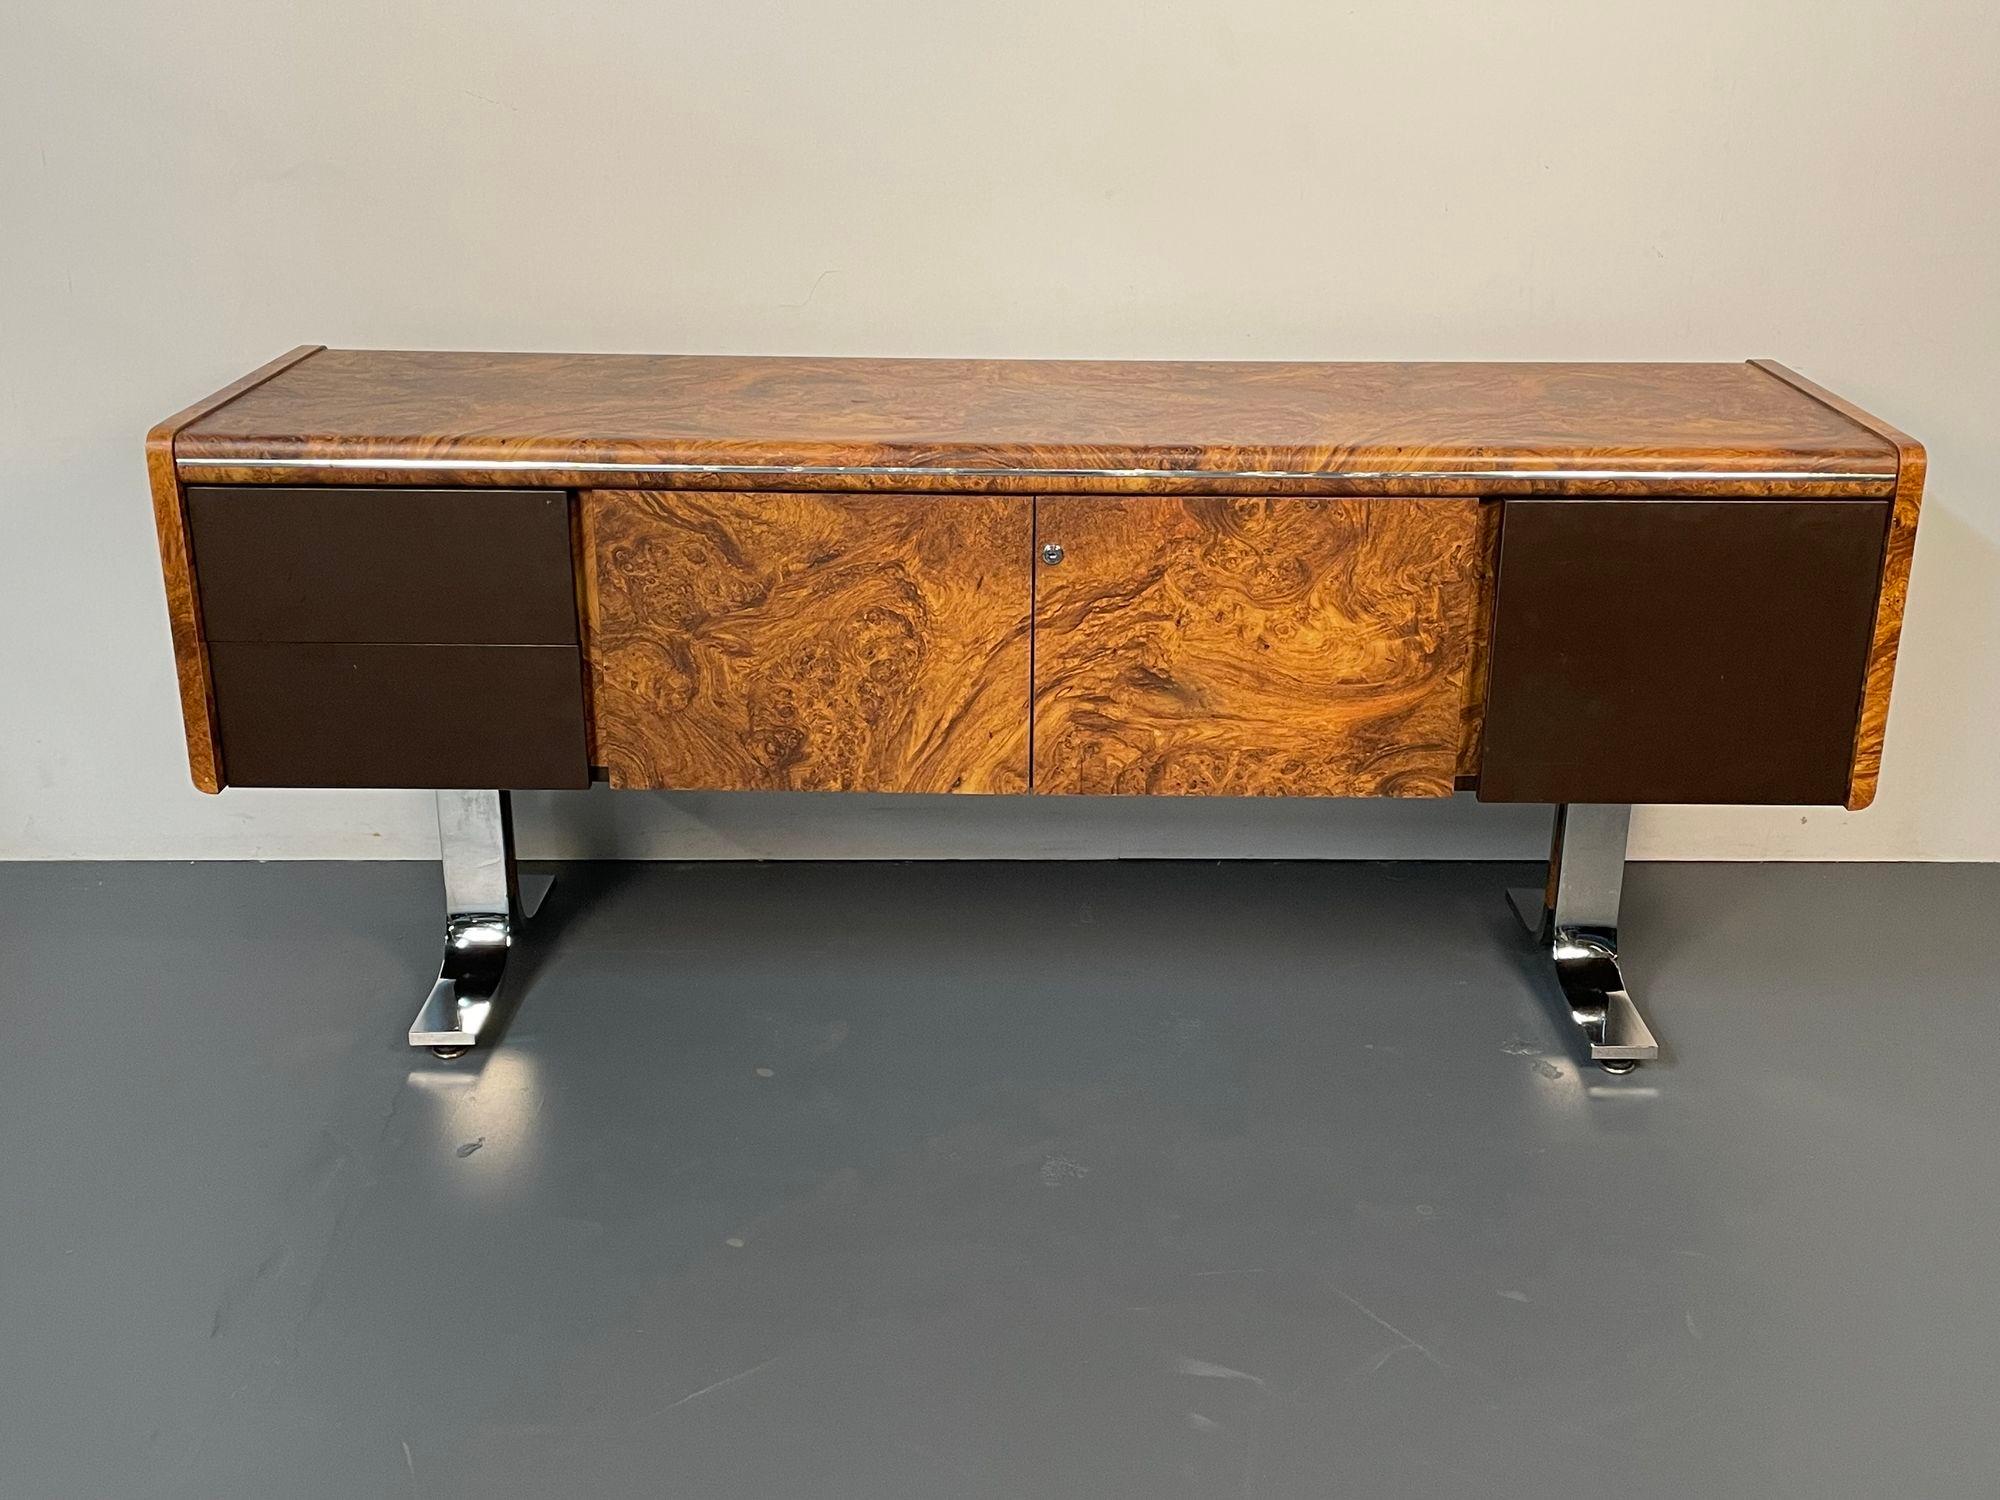 Leif Jacobsen Style, Mid-Century Modern, Credenza, Burlwood, Canada, 1950s For Sale 2